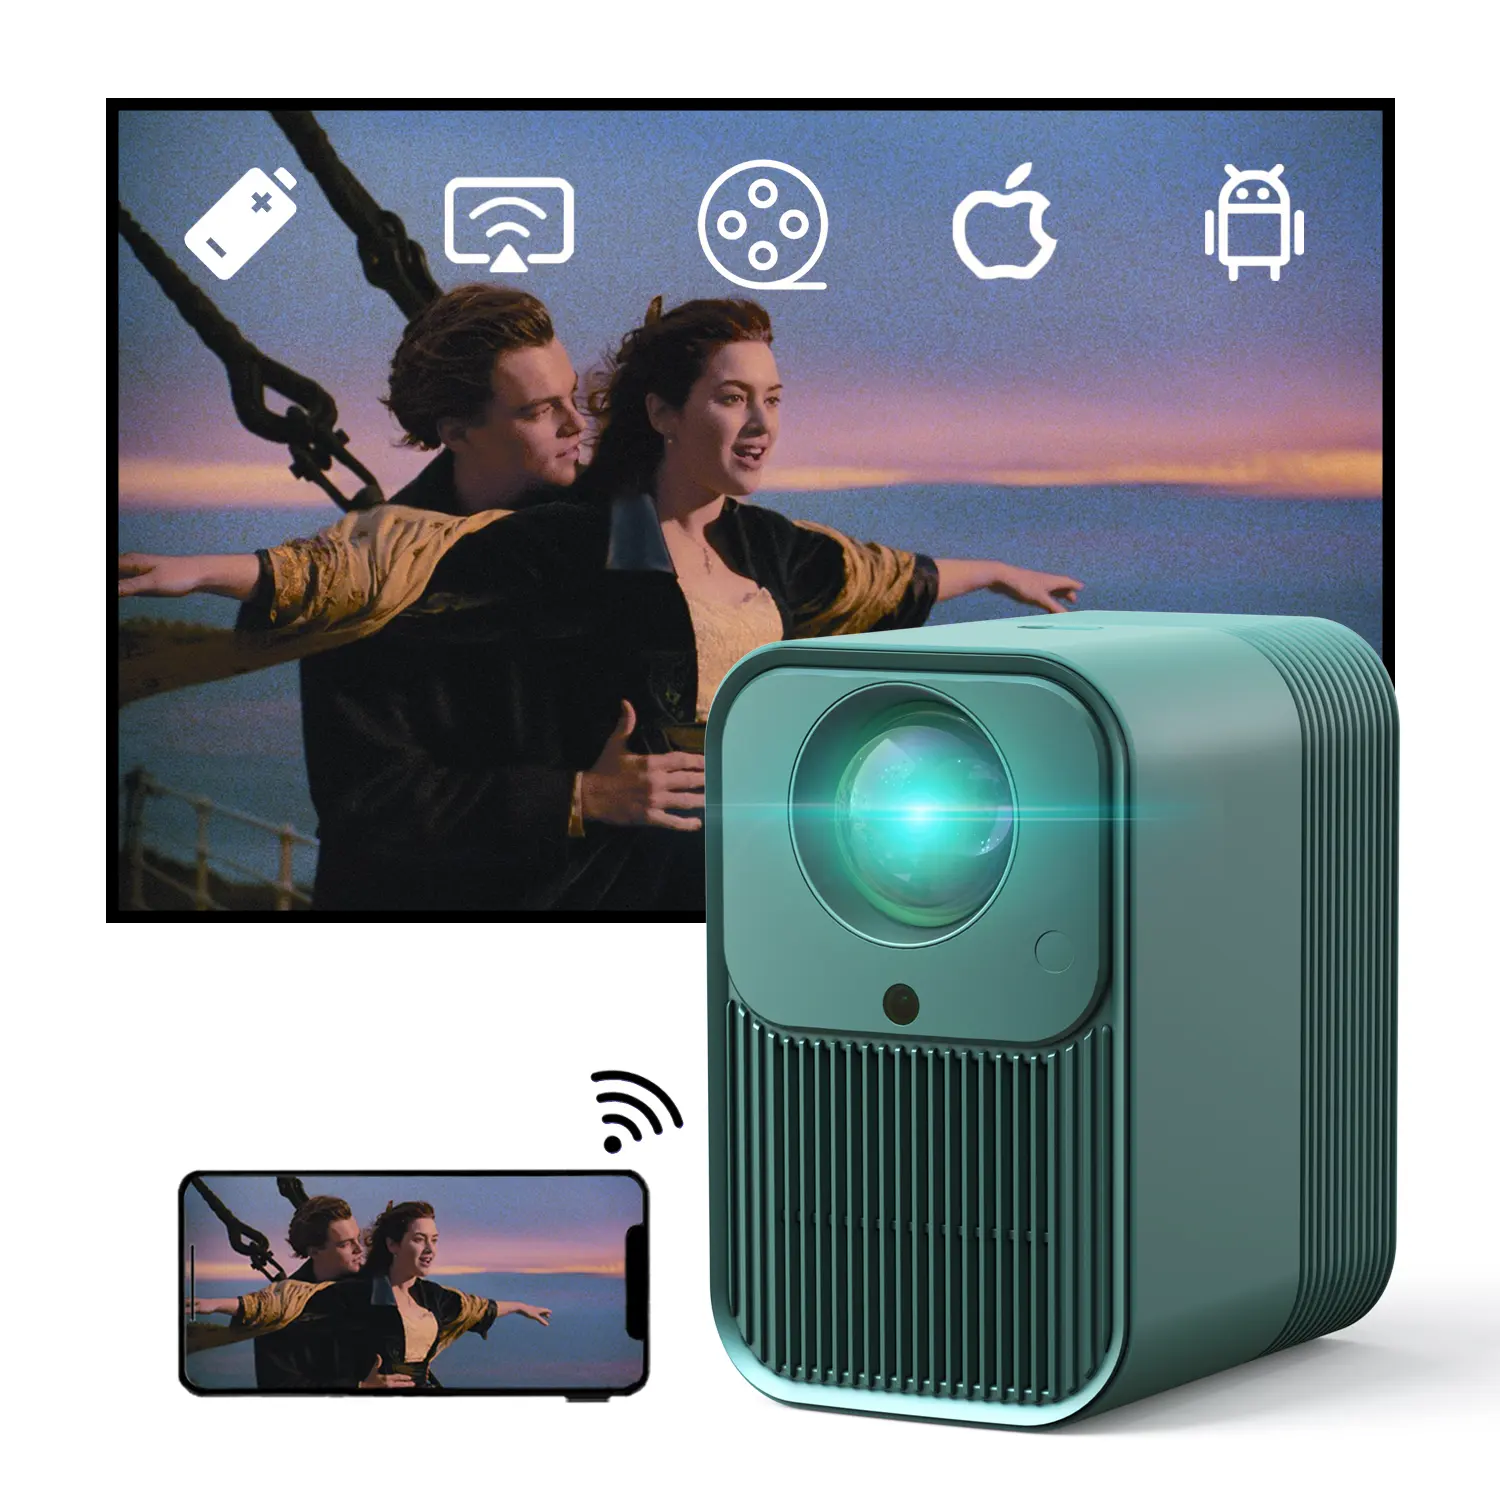 OEM/ODM Available Handphone Mini Pocket TV Proyector Wifi 7000 Lumens LED LCD Light Gaming Projector